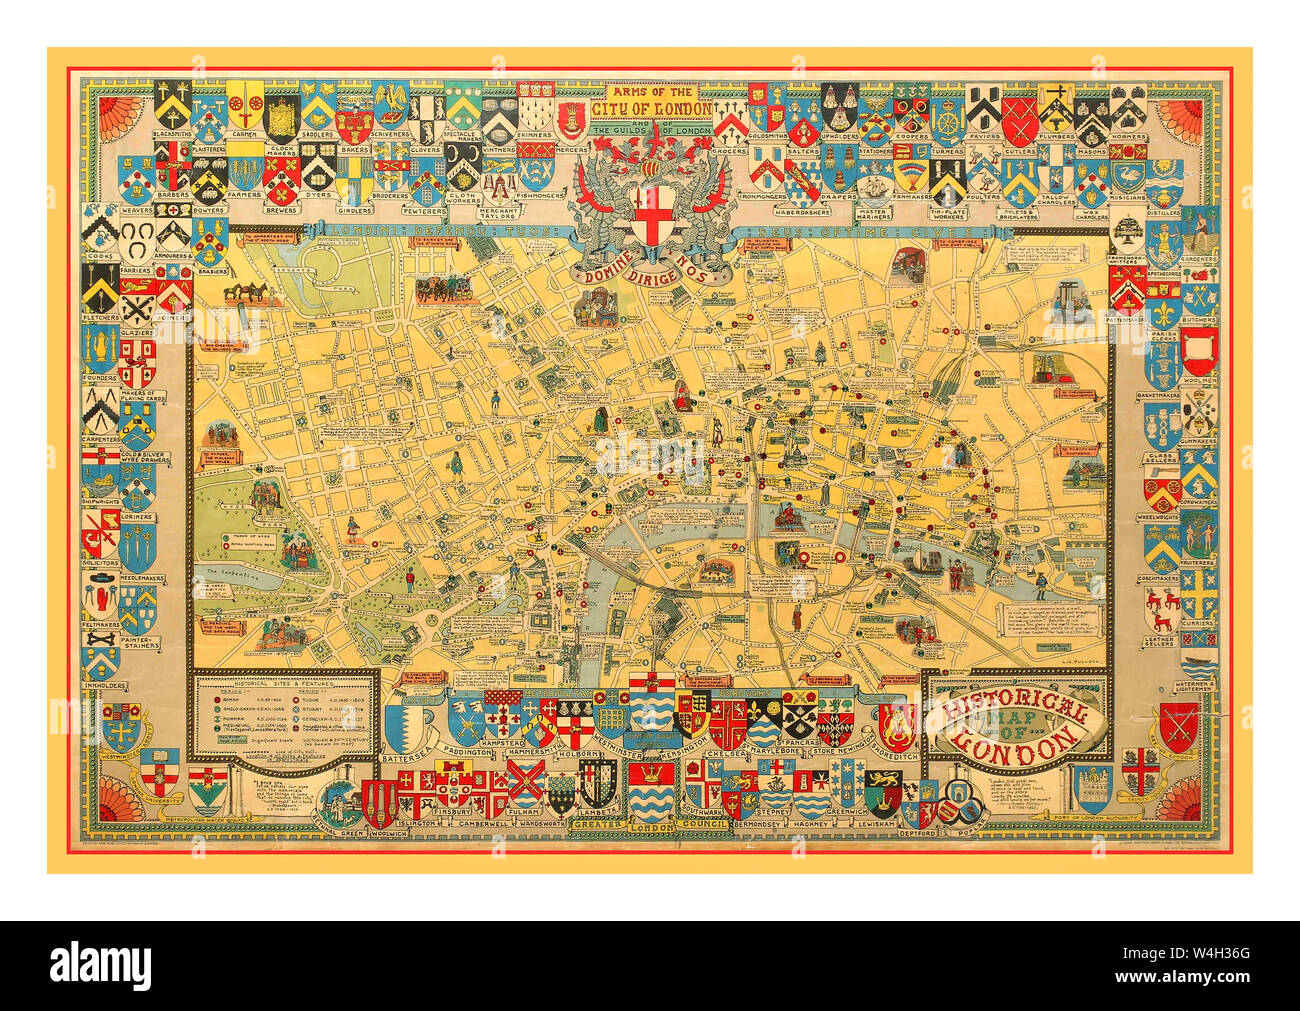 Vintage 1960's map poster of the capital of England -Historical Map of London - by notable cartographer and pictorial map artist Leslie George Bullock (1895-1971) featuring heraldic colourful and detailed illustrations including landmarks, parks, railway lines, historical buildings, people and workers in different period dress. Printed by John Bartholomew and Son. Horizontal. County: UK, year of printing:1969, designer: LG Bullock, Stock Photo